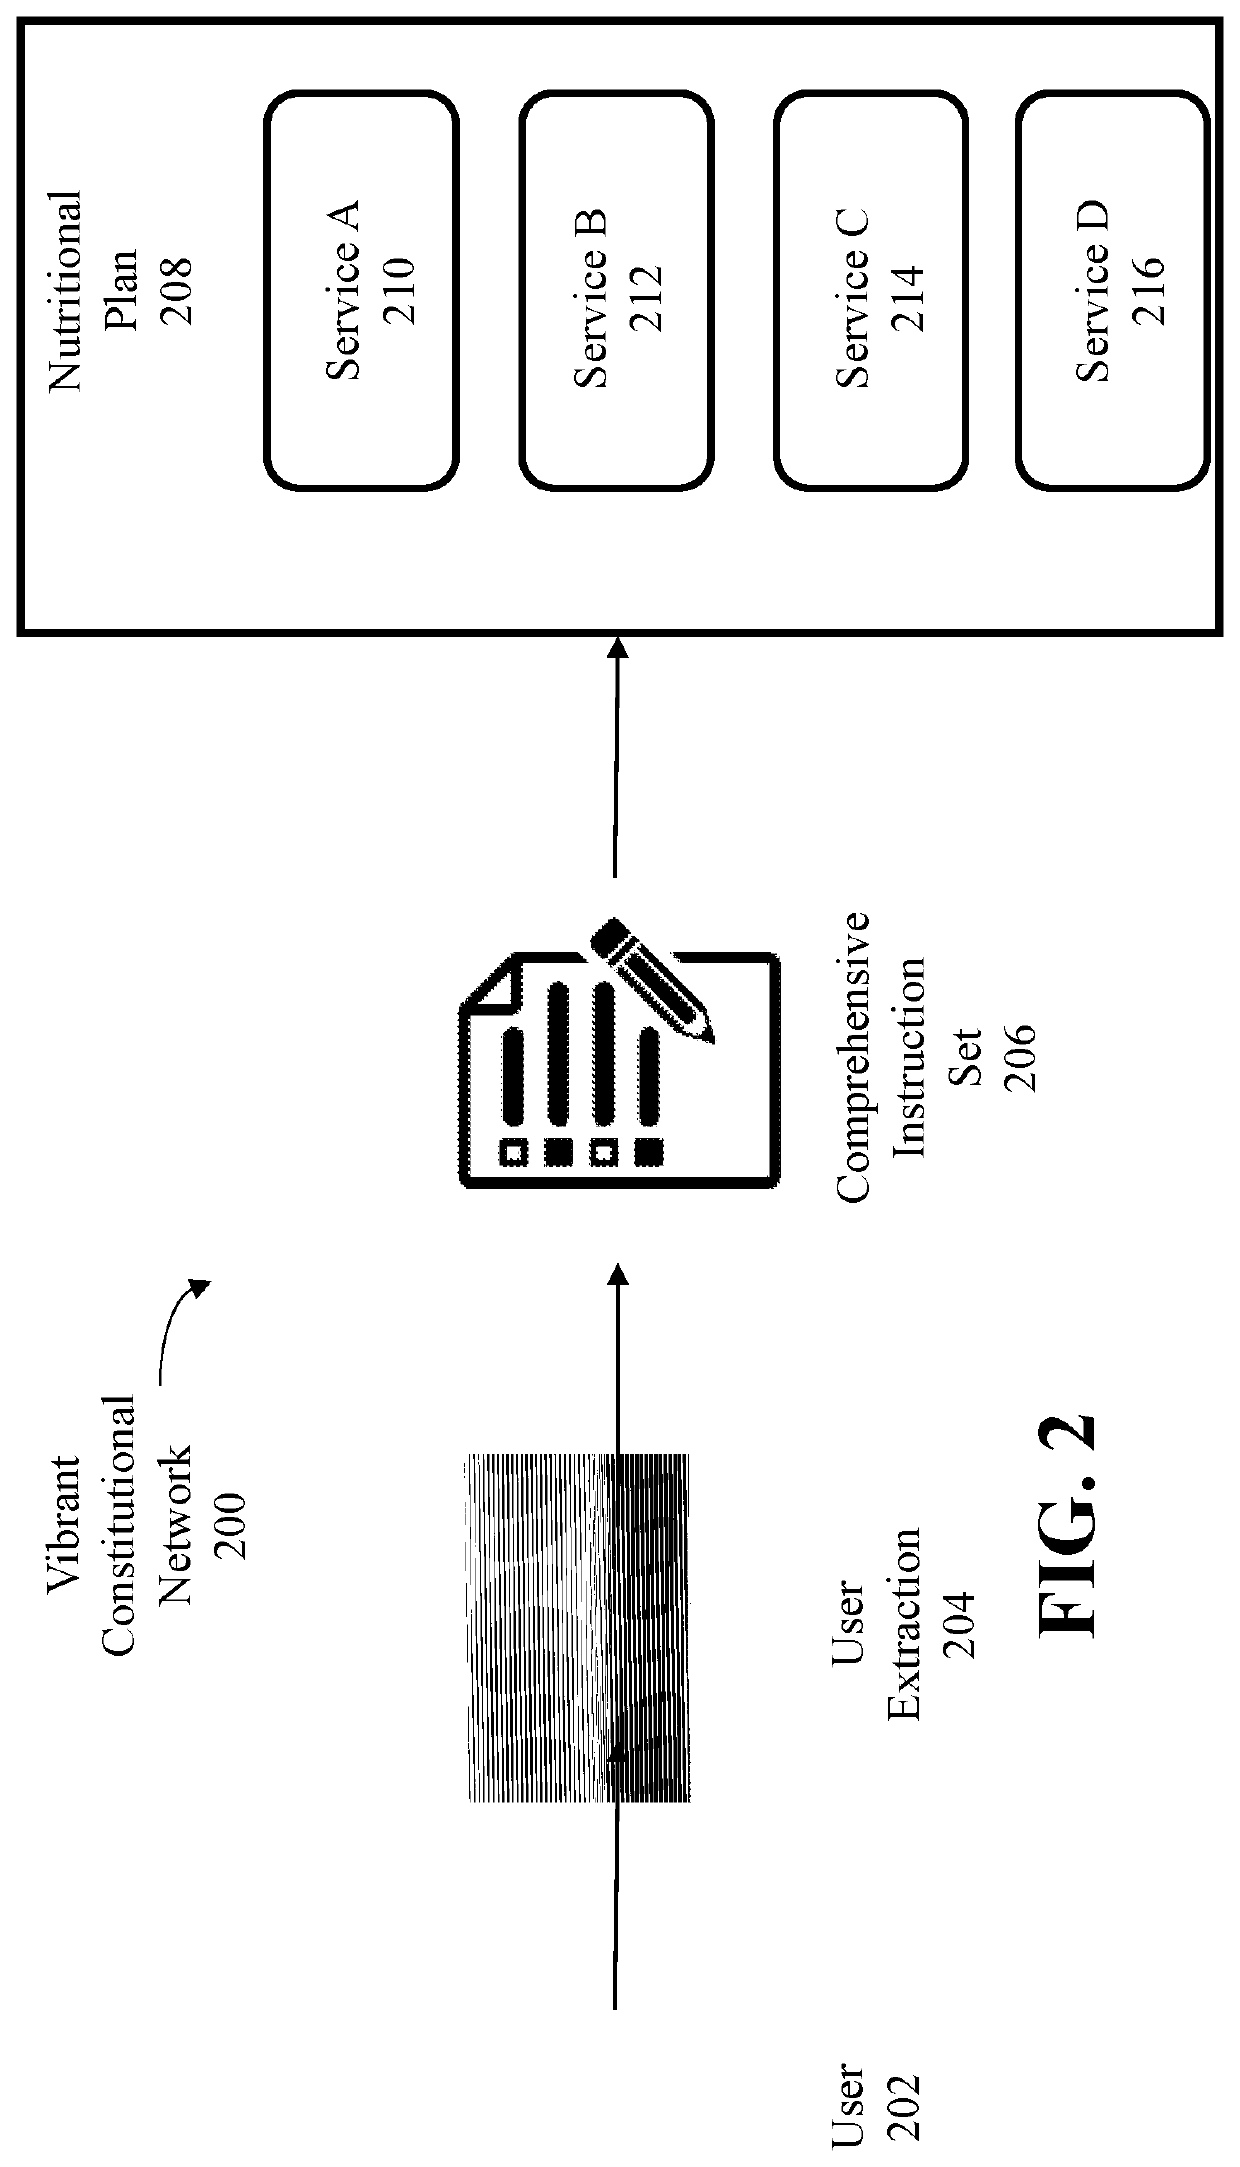 Systems and methods for generating alimentary instruction sets based on vibrant constitutional guidance